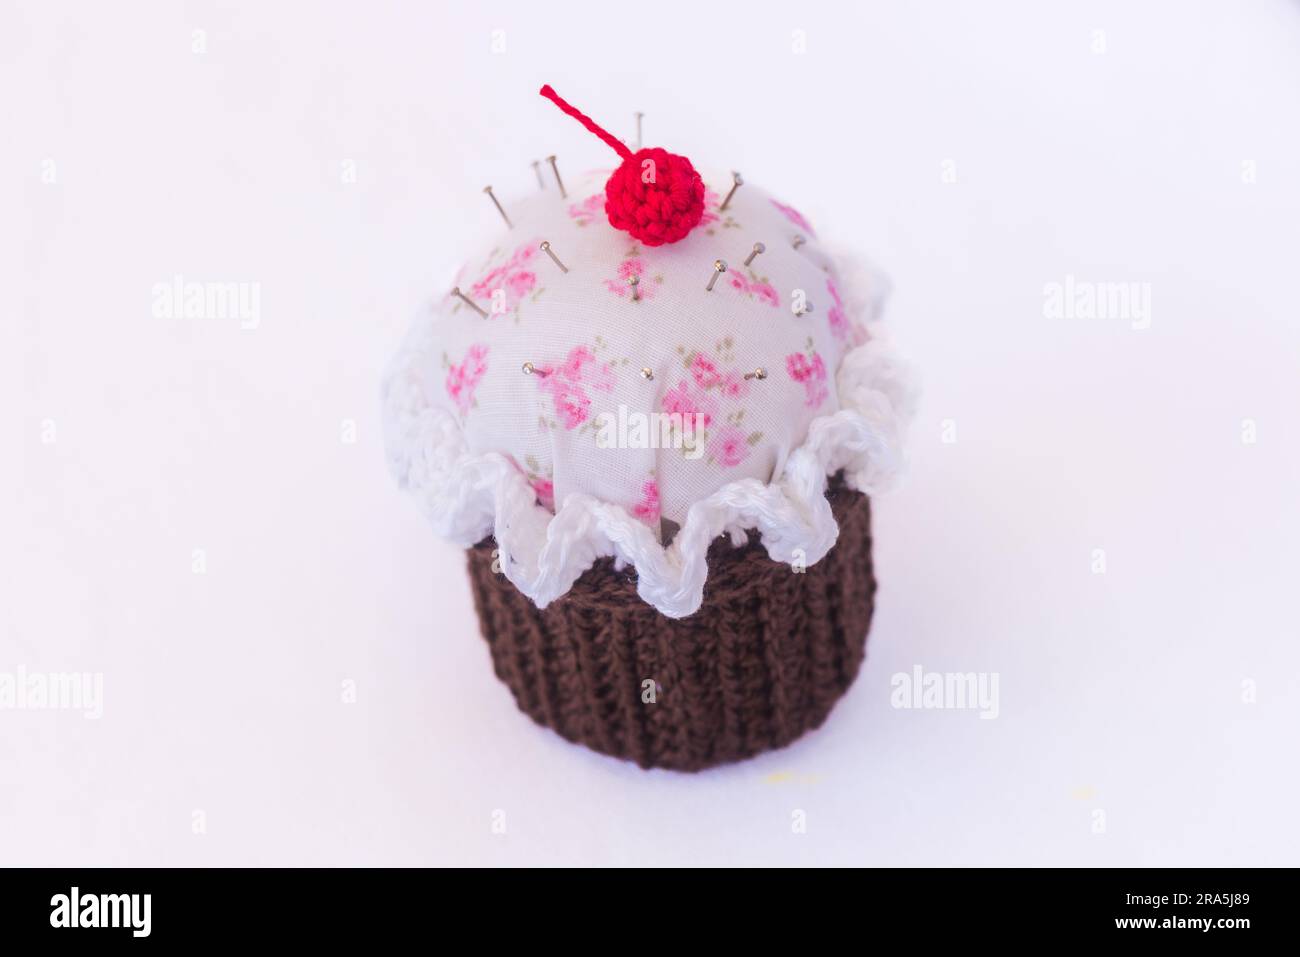 details of a cupcake-shaped pincushion, on a white background Stock Photo